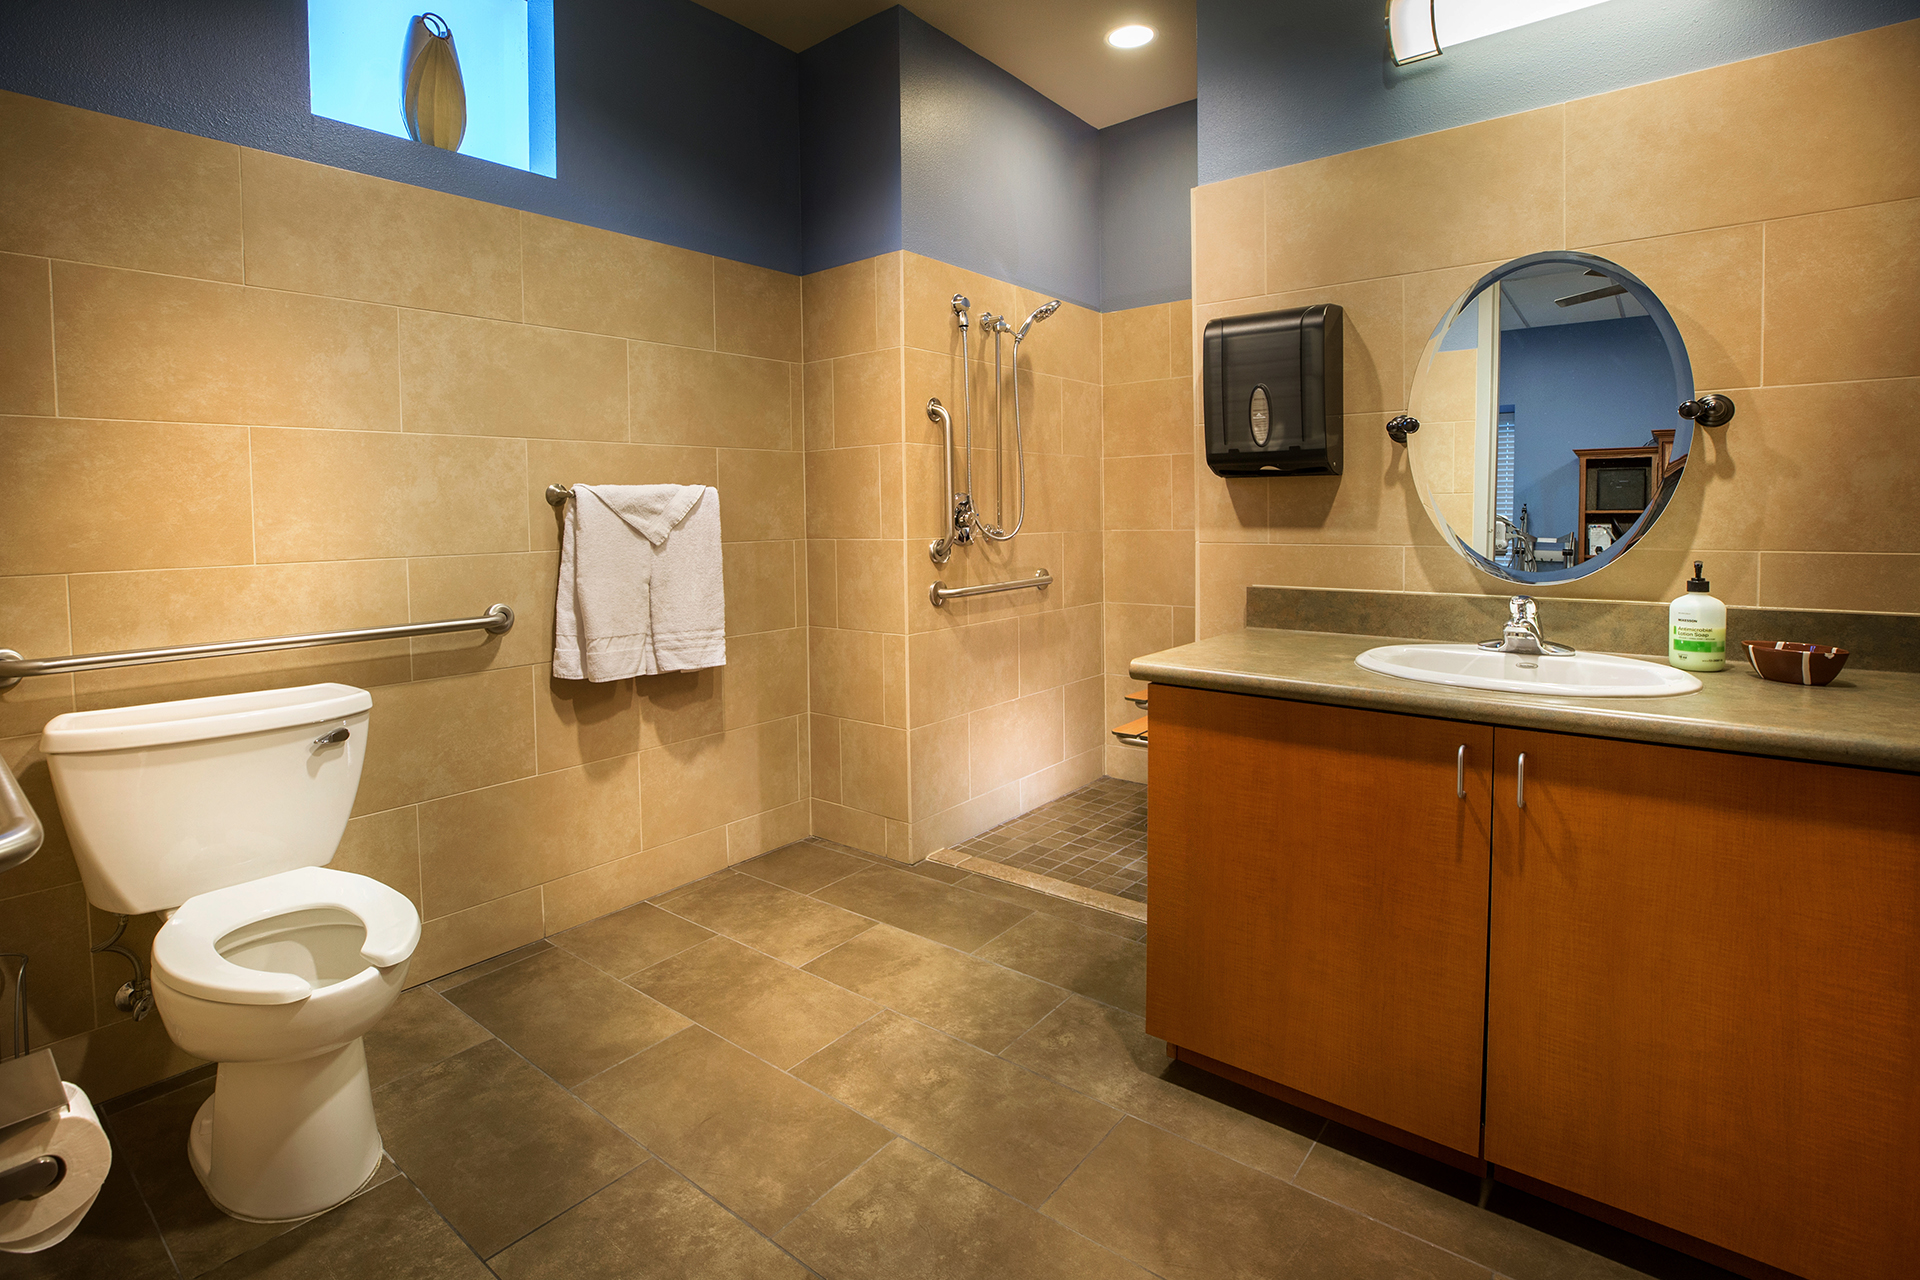 Another view of the bathroom with shower inside Crovetti Orthopaedics in Las Vegas, NV